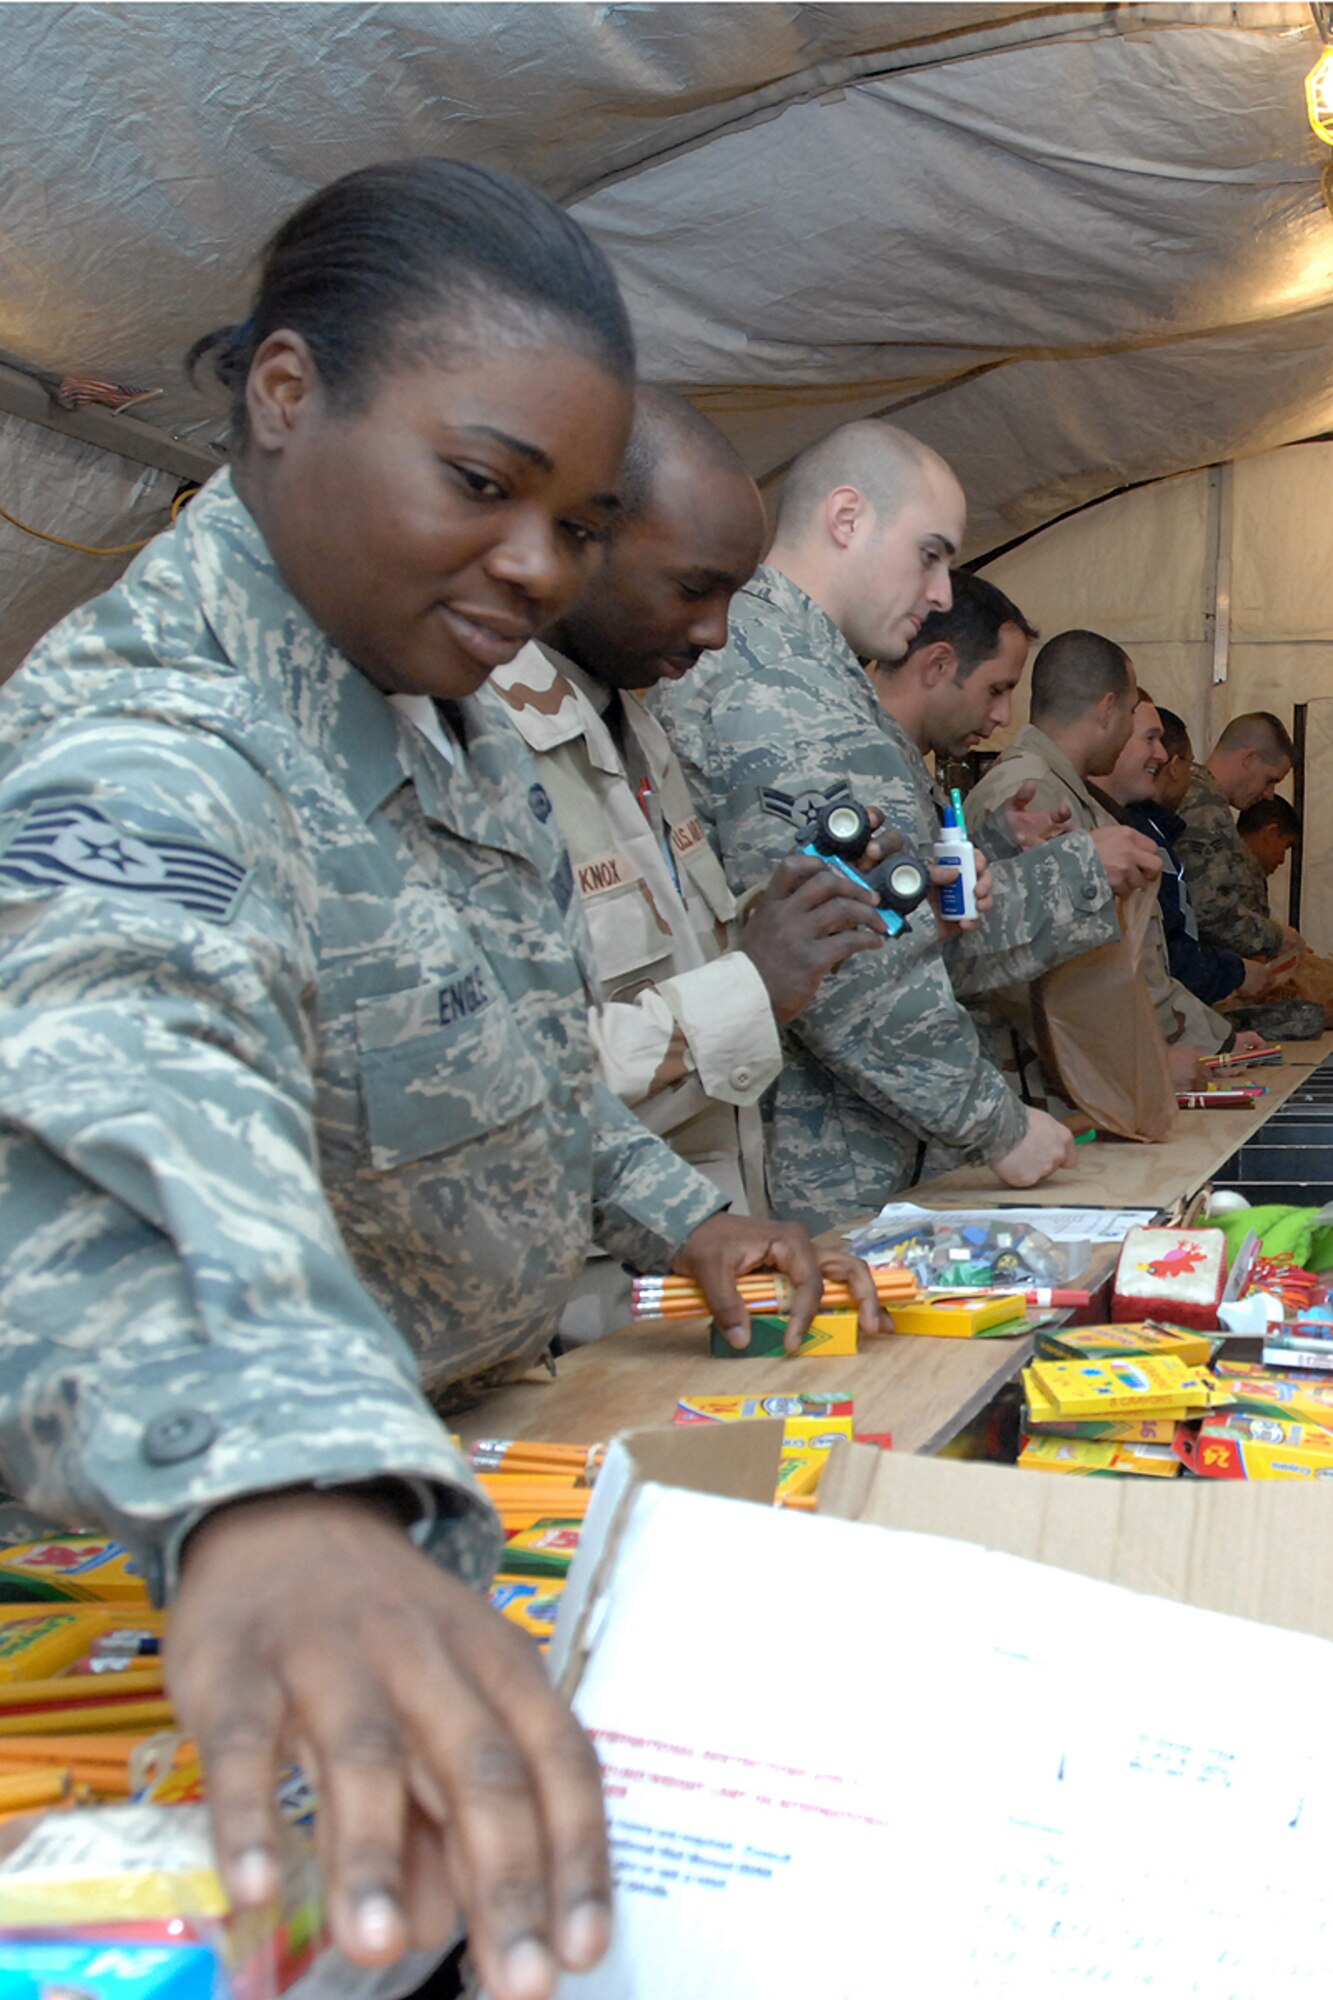 Tech. Sgt. Ingrid Engle of the 506th Expeditionary Logistics Readiness Squadron at Kirkuk Regional Air Base, Iraq, packs school supplies Jan. 29, 2009. The Loxahatchee, Fla., native was one of 30 Airmen to volunteer for the base chapel's Operation School Supply drive for Iraqi children. Sergeant Engle is an Air Force reservist from Homestead Air Reserve Base, Fla., where she works as an air transportation specialist in the 70th Aerial Port Squadron. (U.S. Air Force photo/Senior Airman Eunique Stevens)